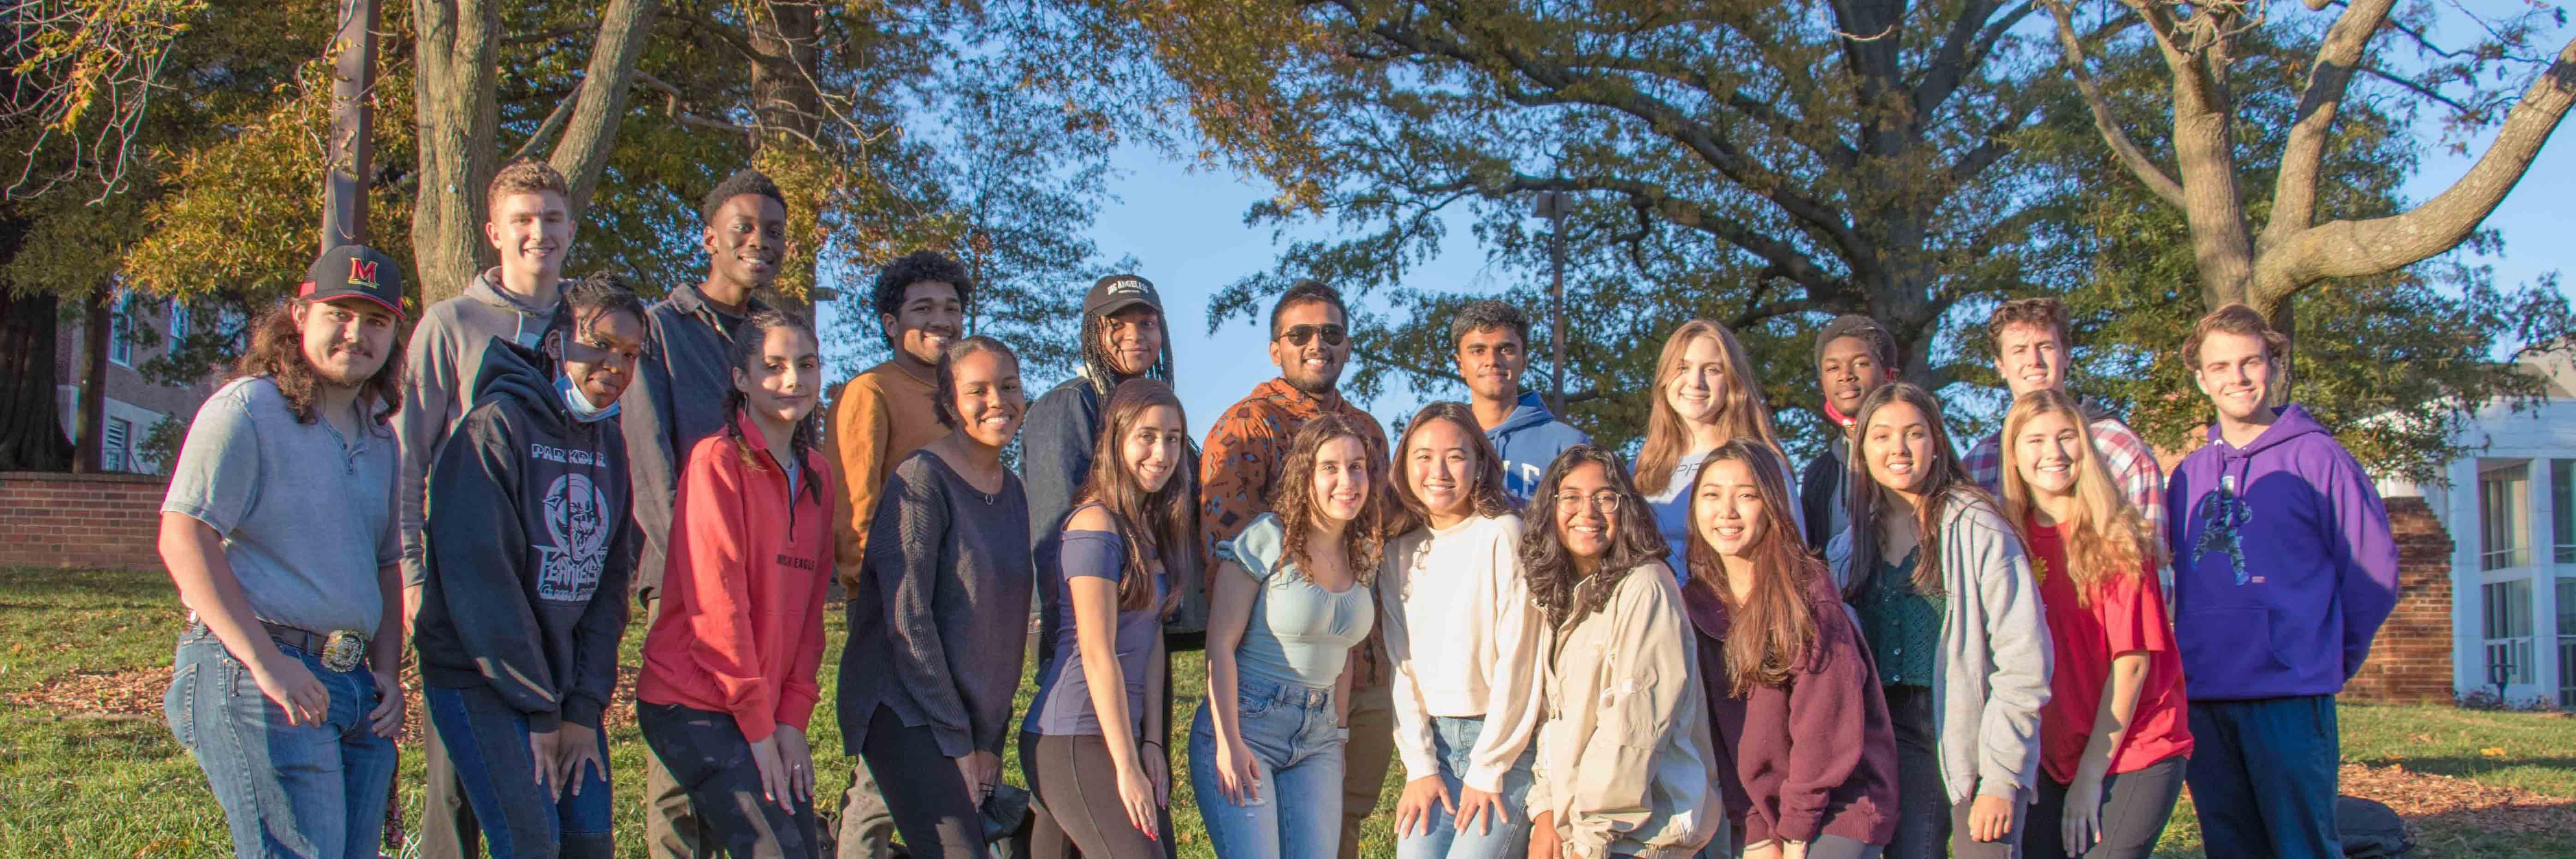 Student Advisory Board pose in two rows on McKeldin Mall